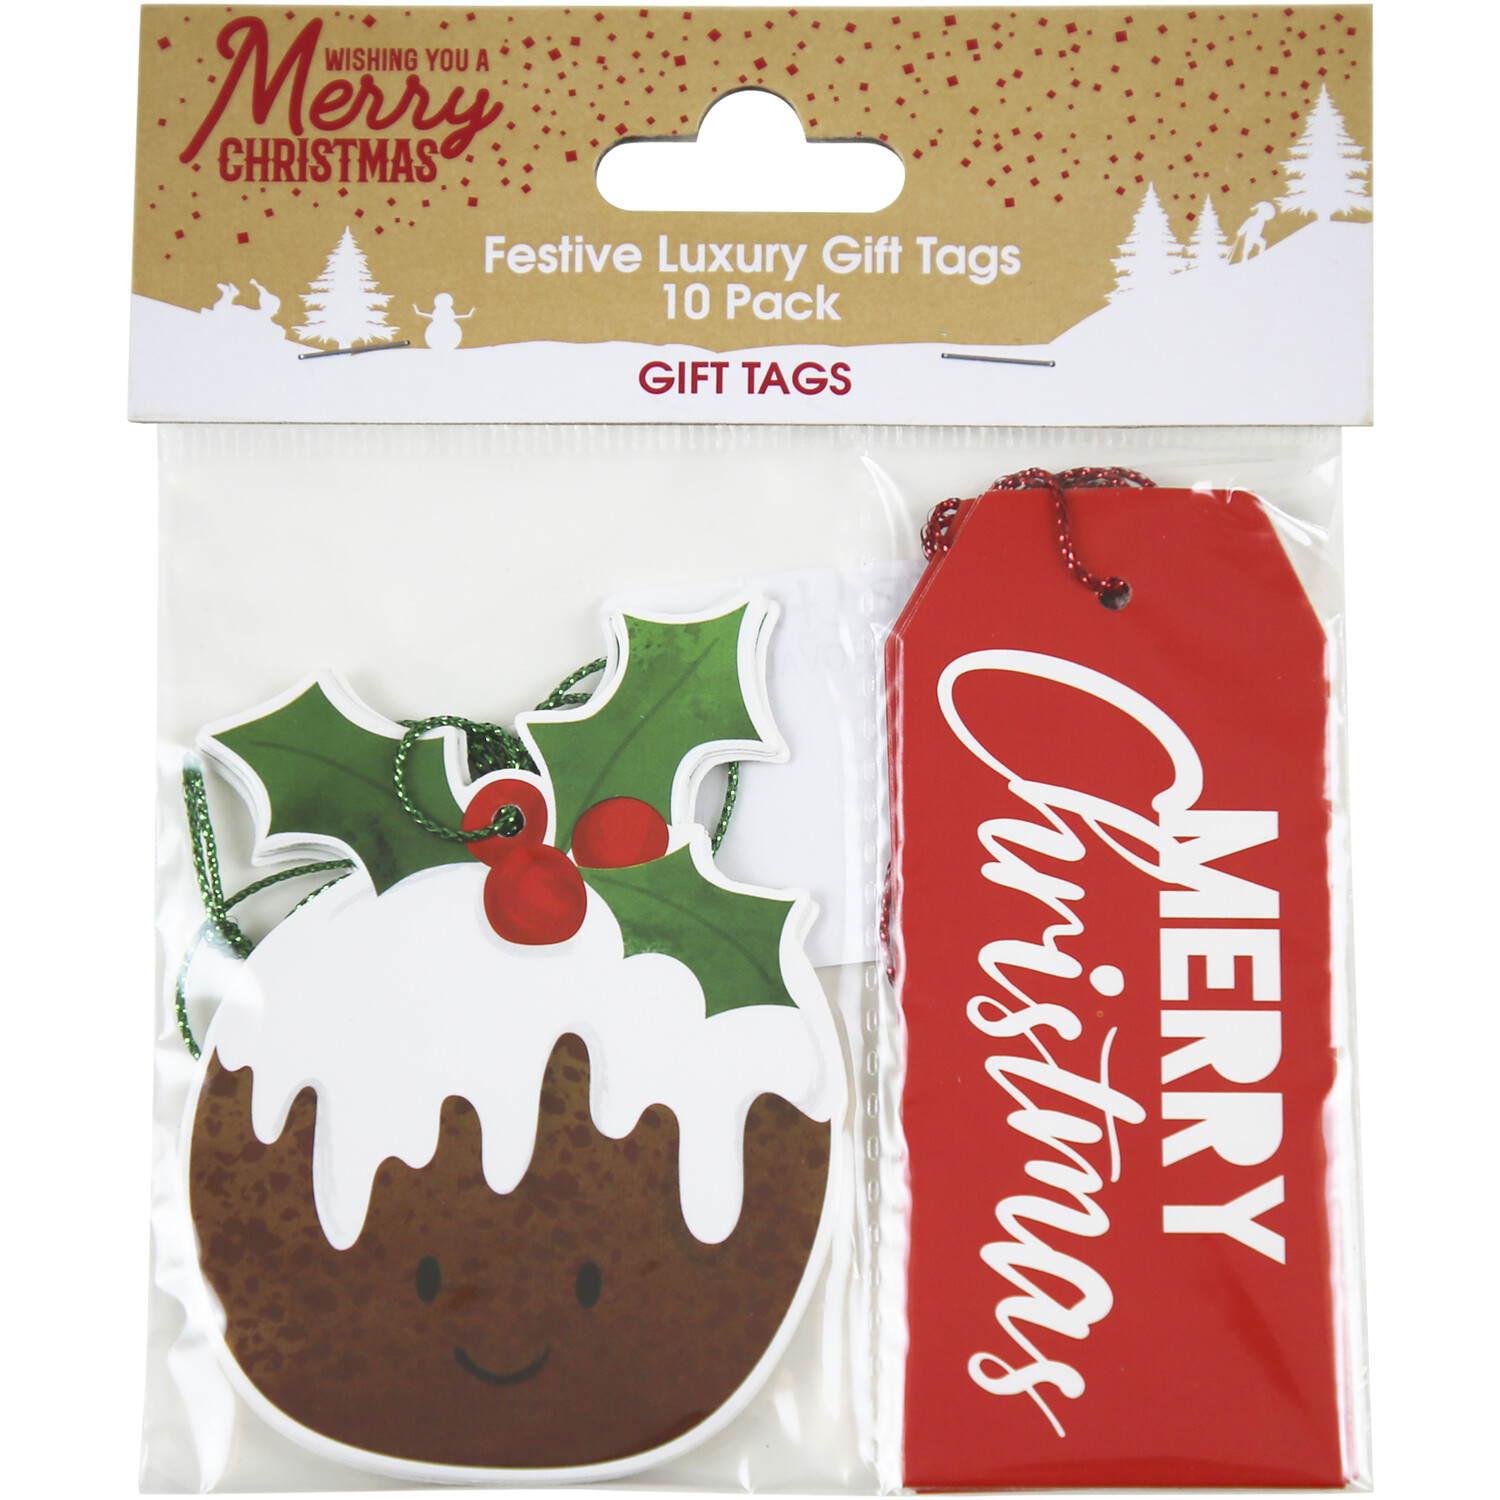 Pack of 10 Festive Food Luxury Gift Tags Image